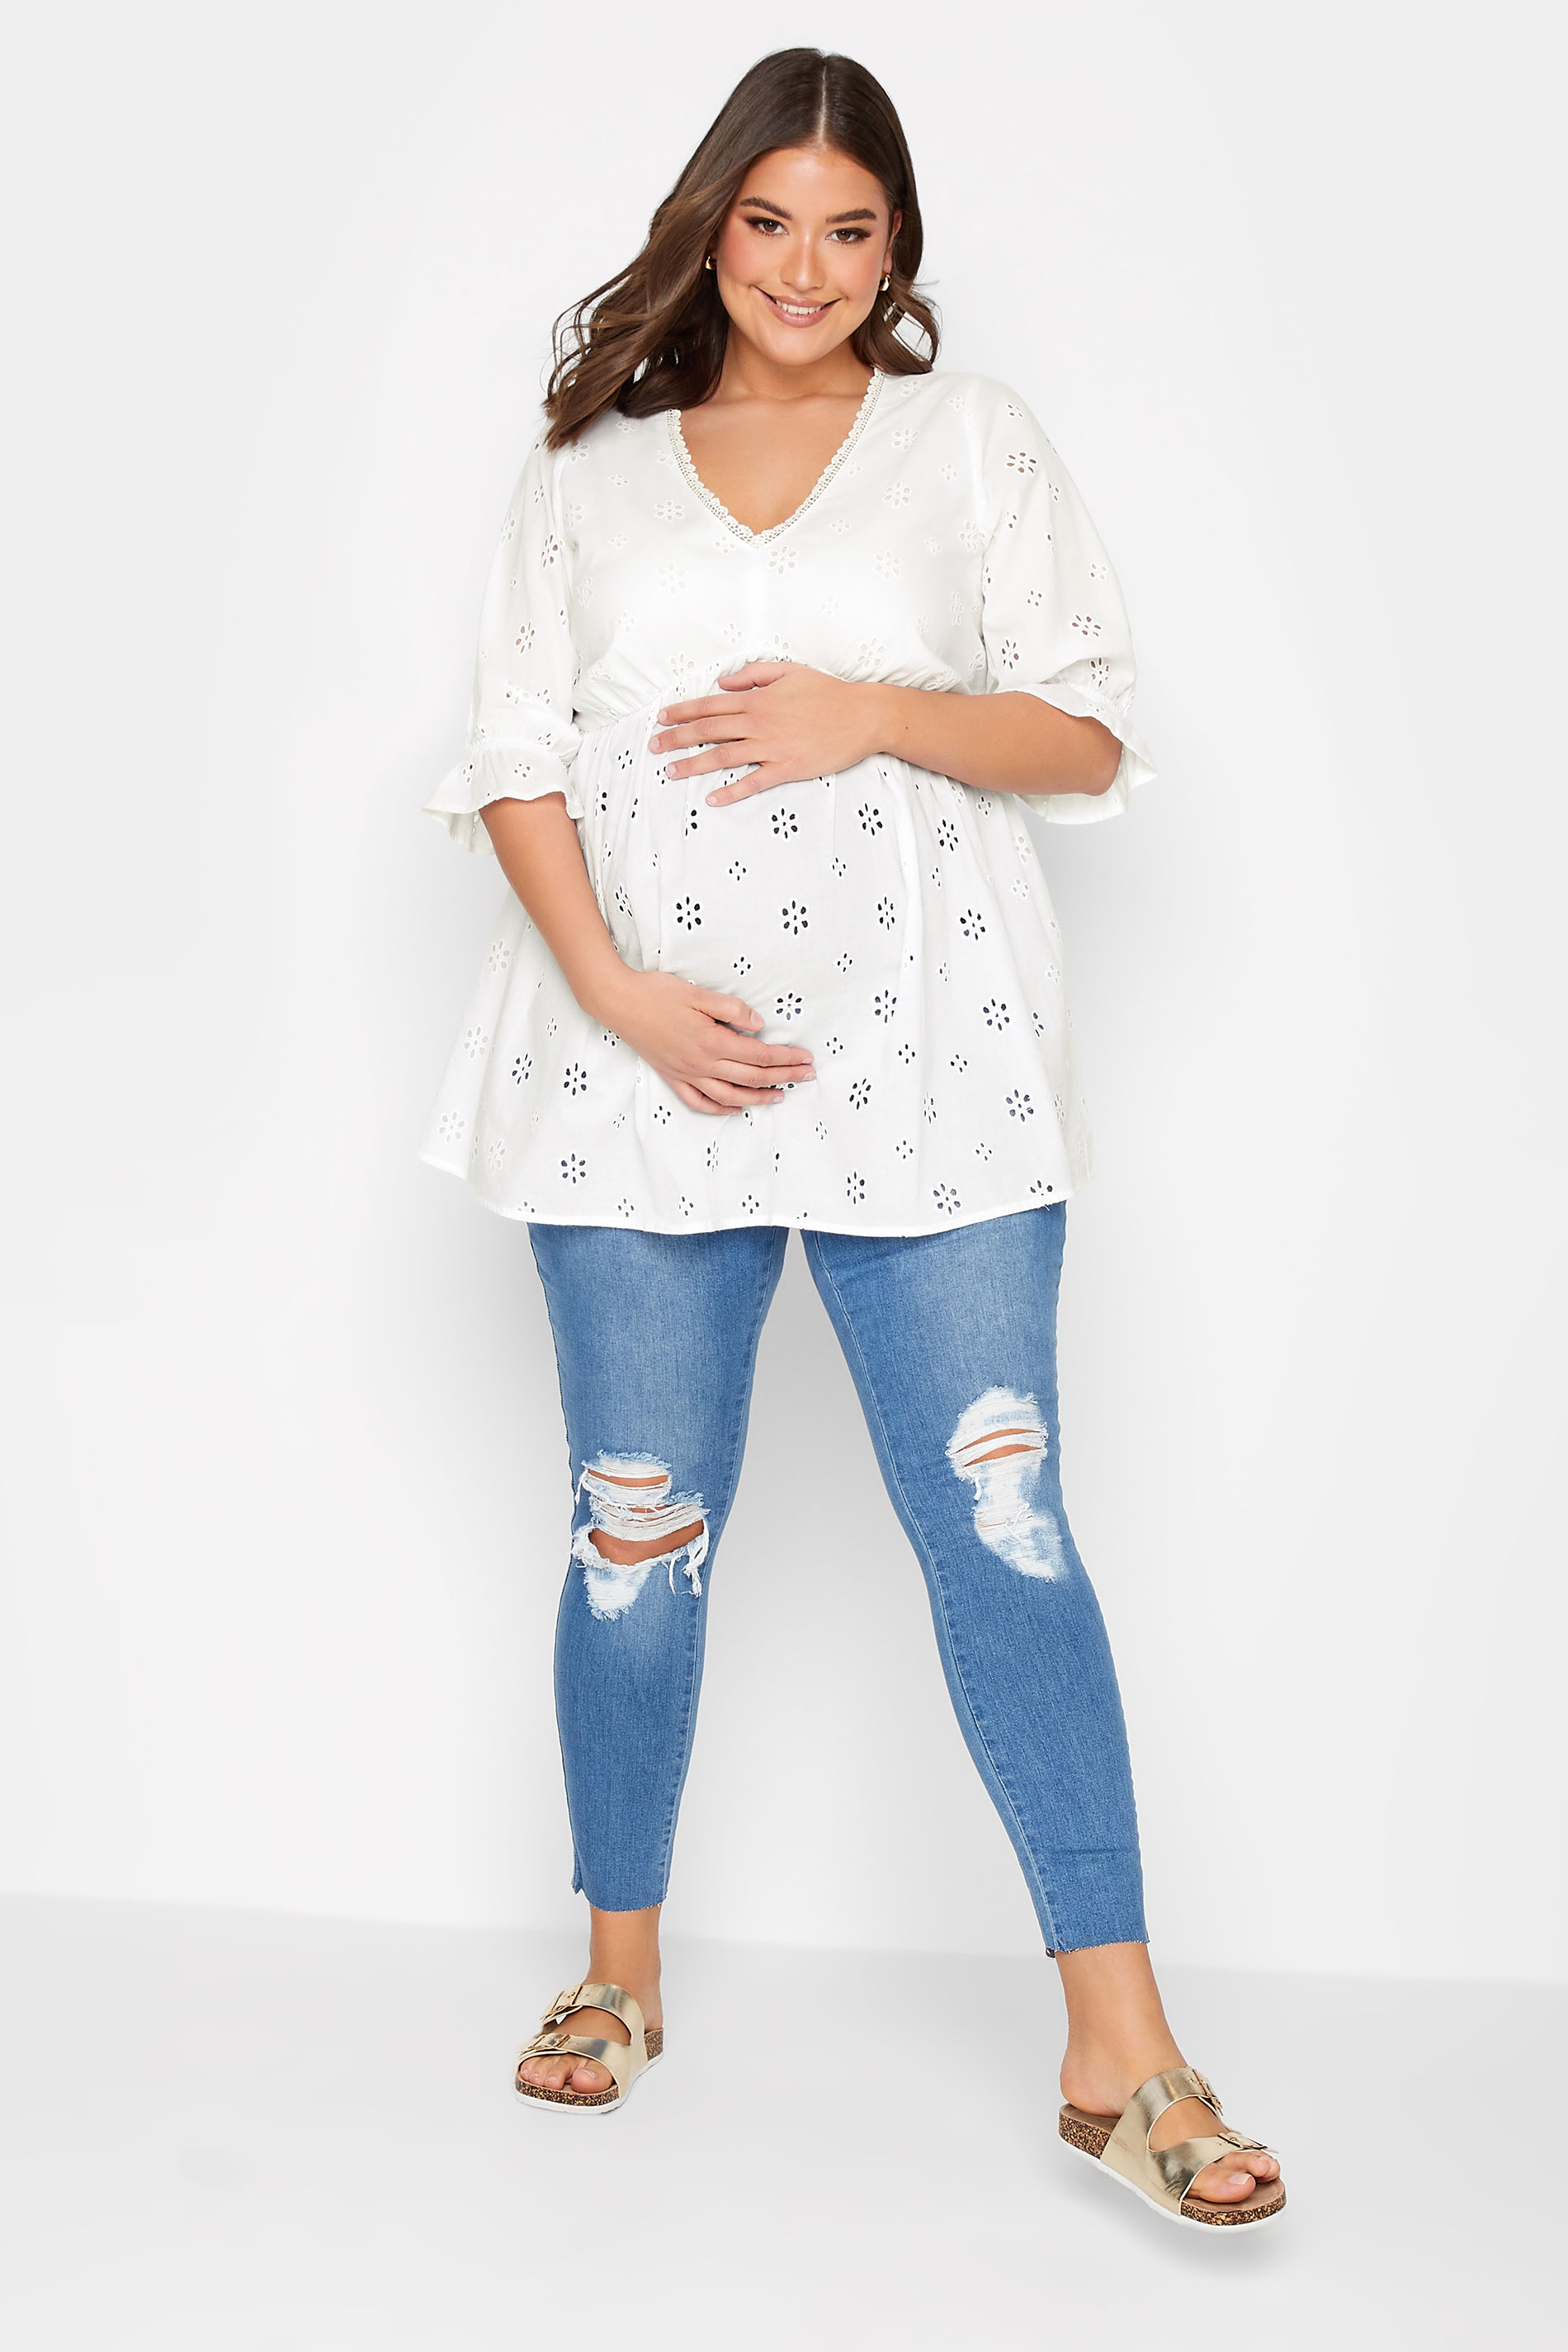 BUMP IT UP MATERNITY Plus Size White Broderie Anglaise Blouse | Yours Clothing 3